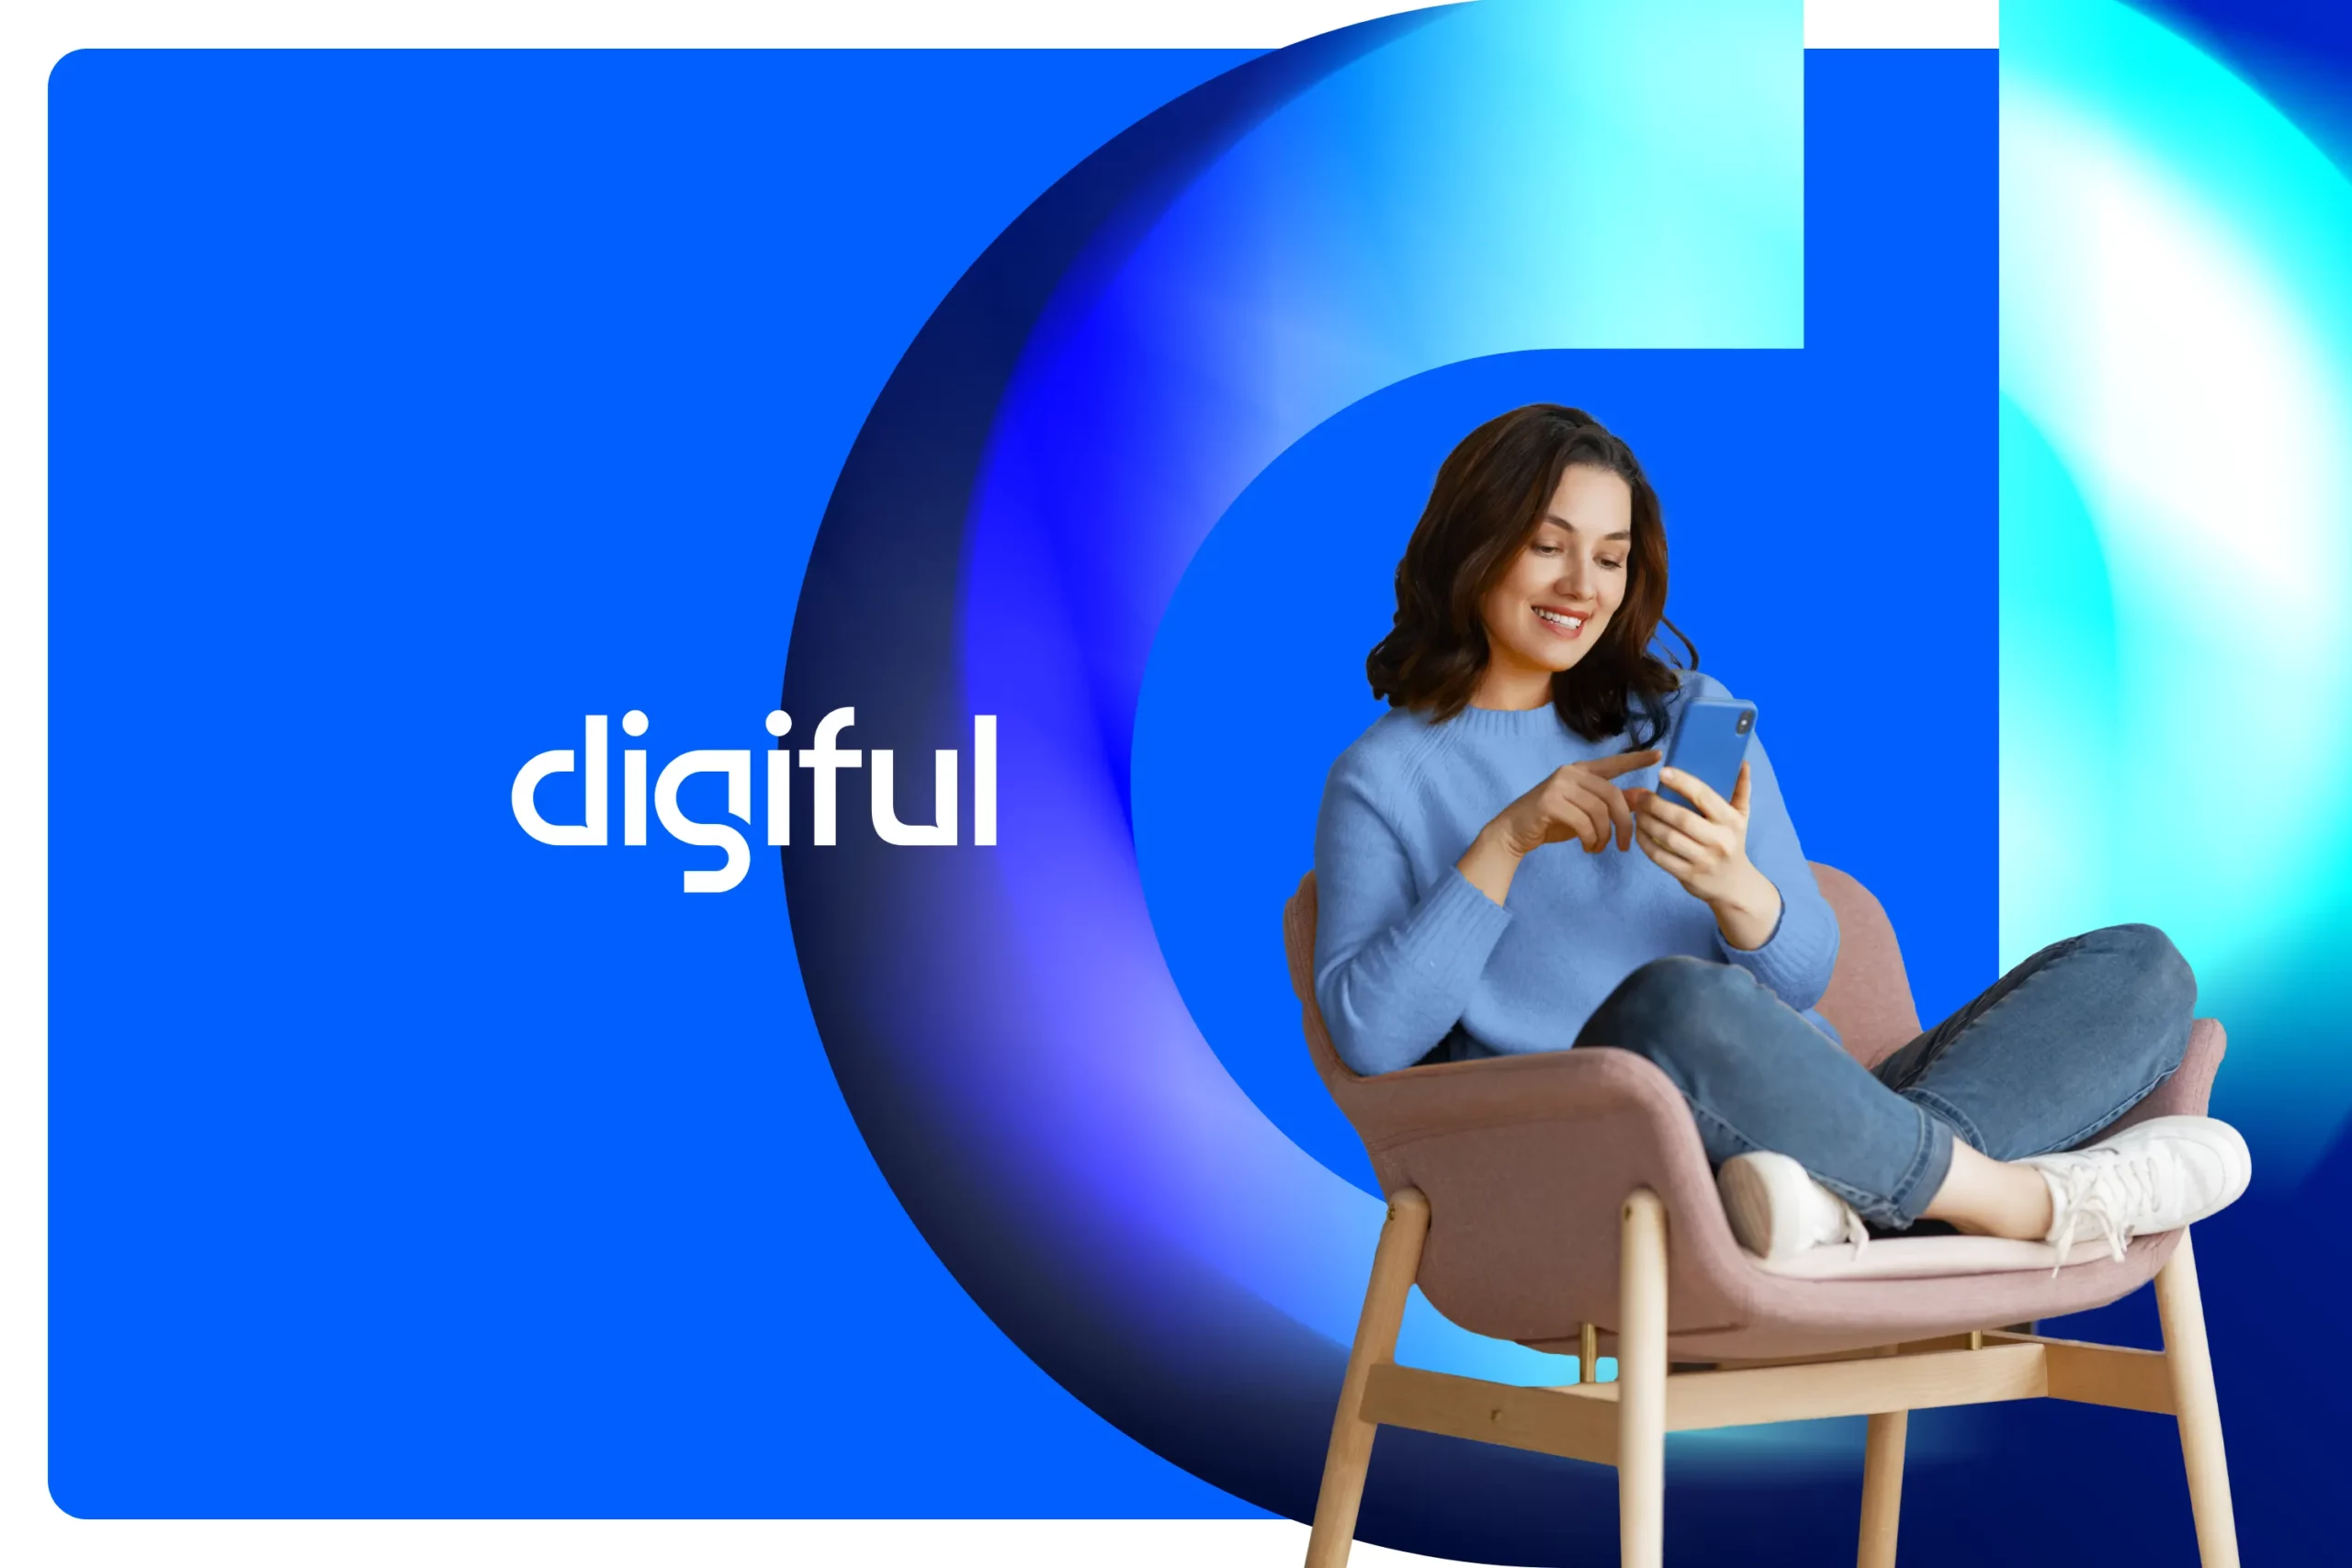 Digital - Brand panel lockup featuring digital logo and young woman using the app on a chair.